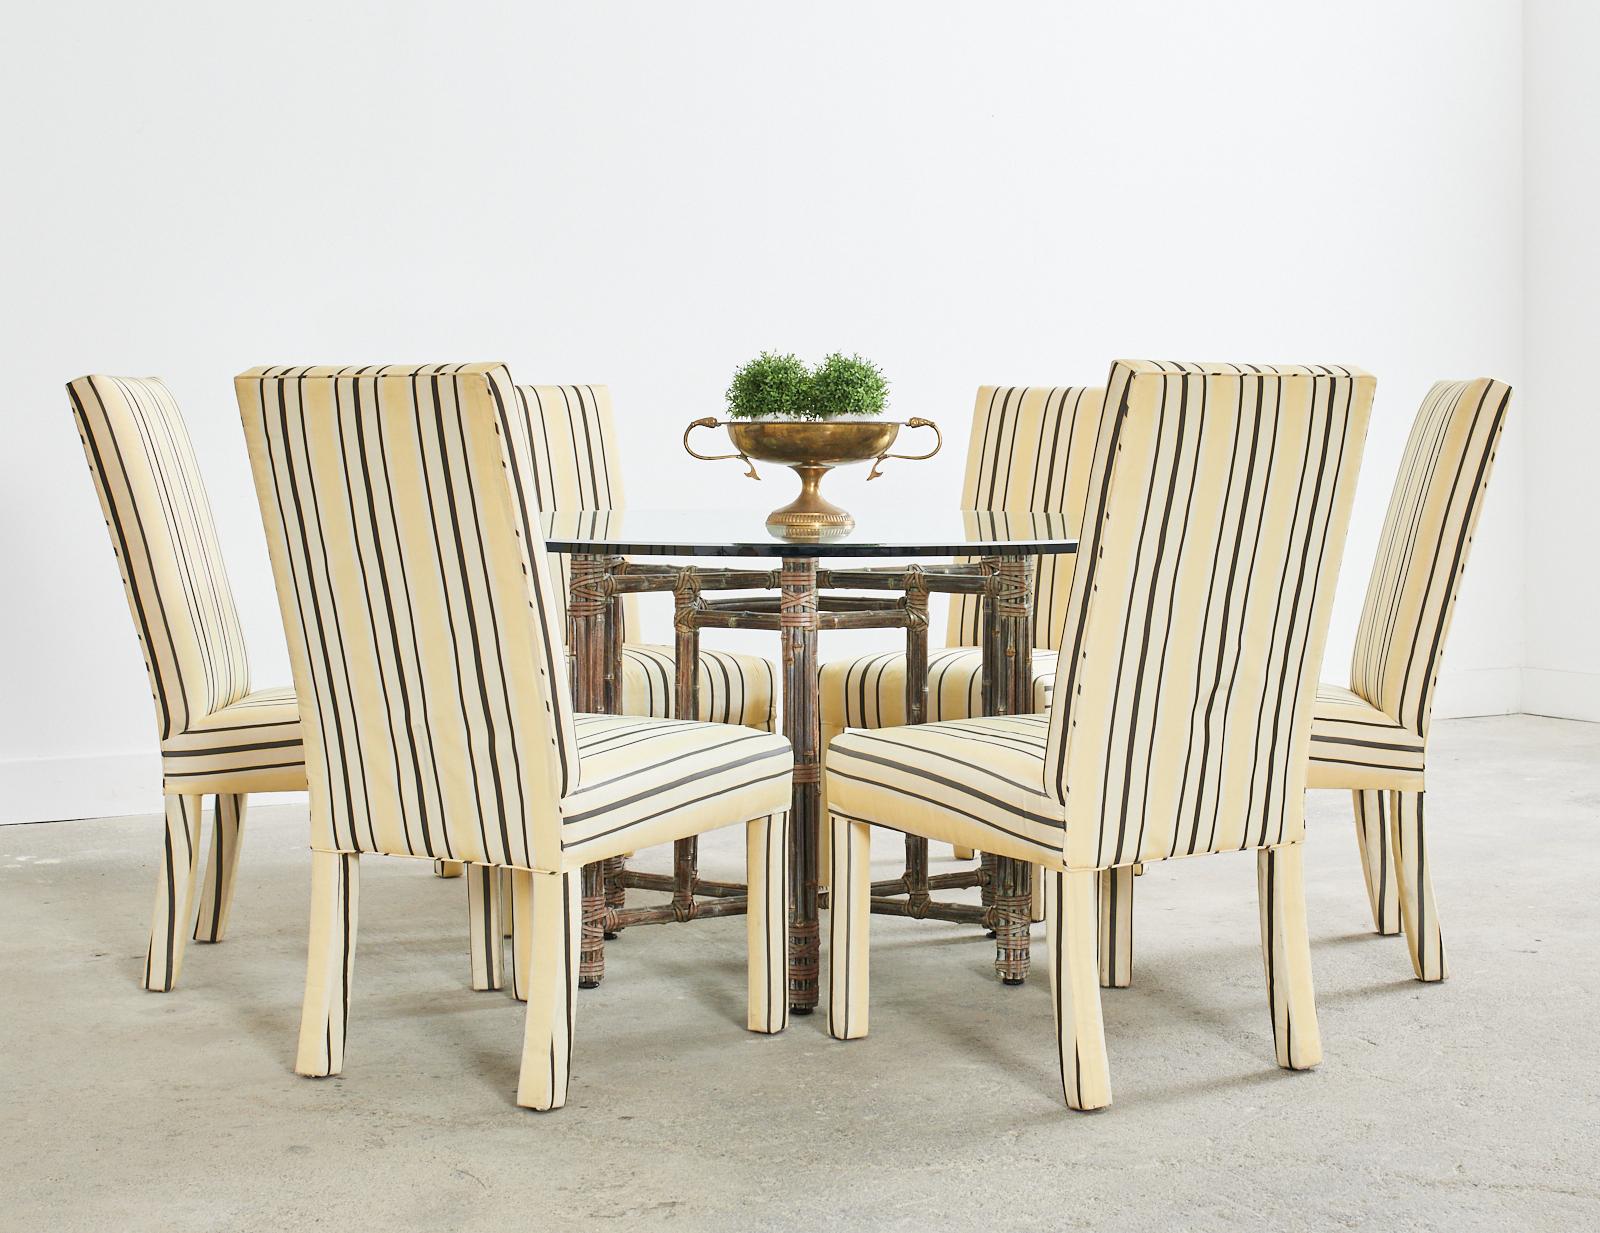 Matching set of twelve Mid-Century Modern Parsons dining chairs upholstered with a silk style striped fabric. Excellent joinery and craftsmanship with vintage fabric that is faded and showing signs of wear. Bespoke set of chairs with generous seats